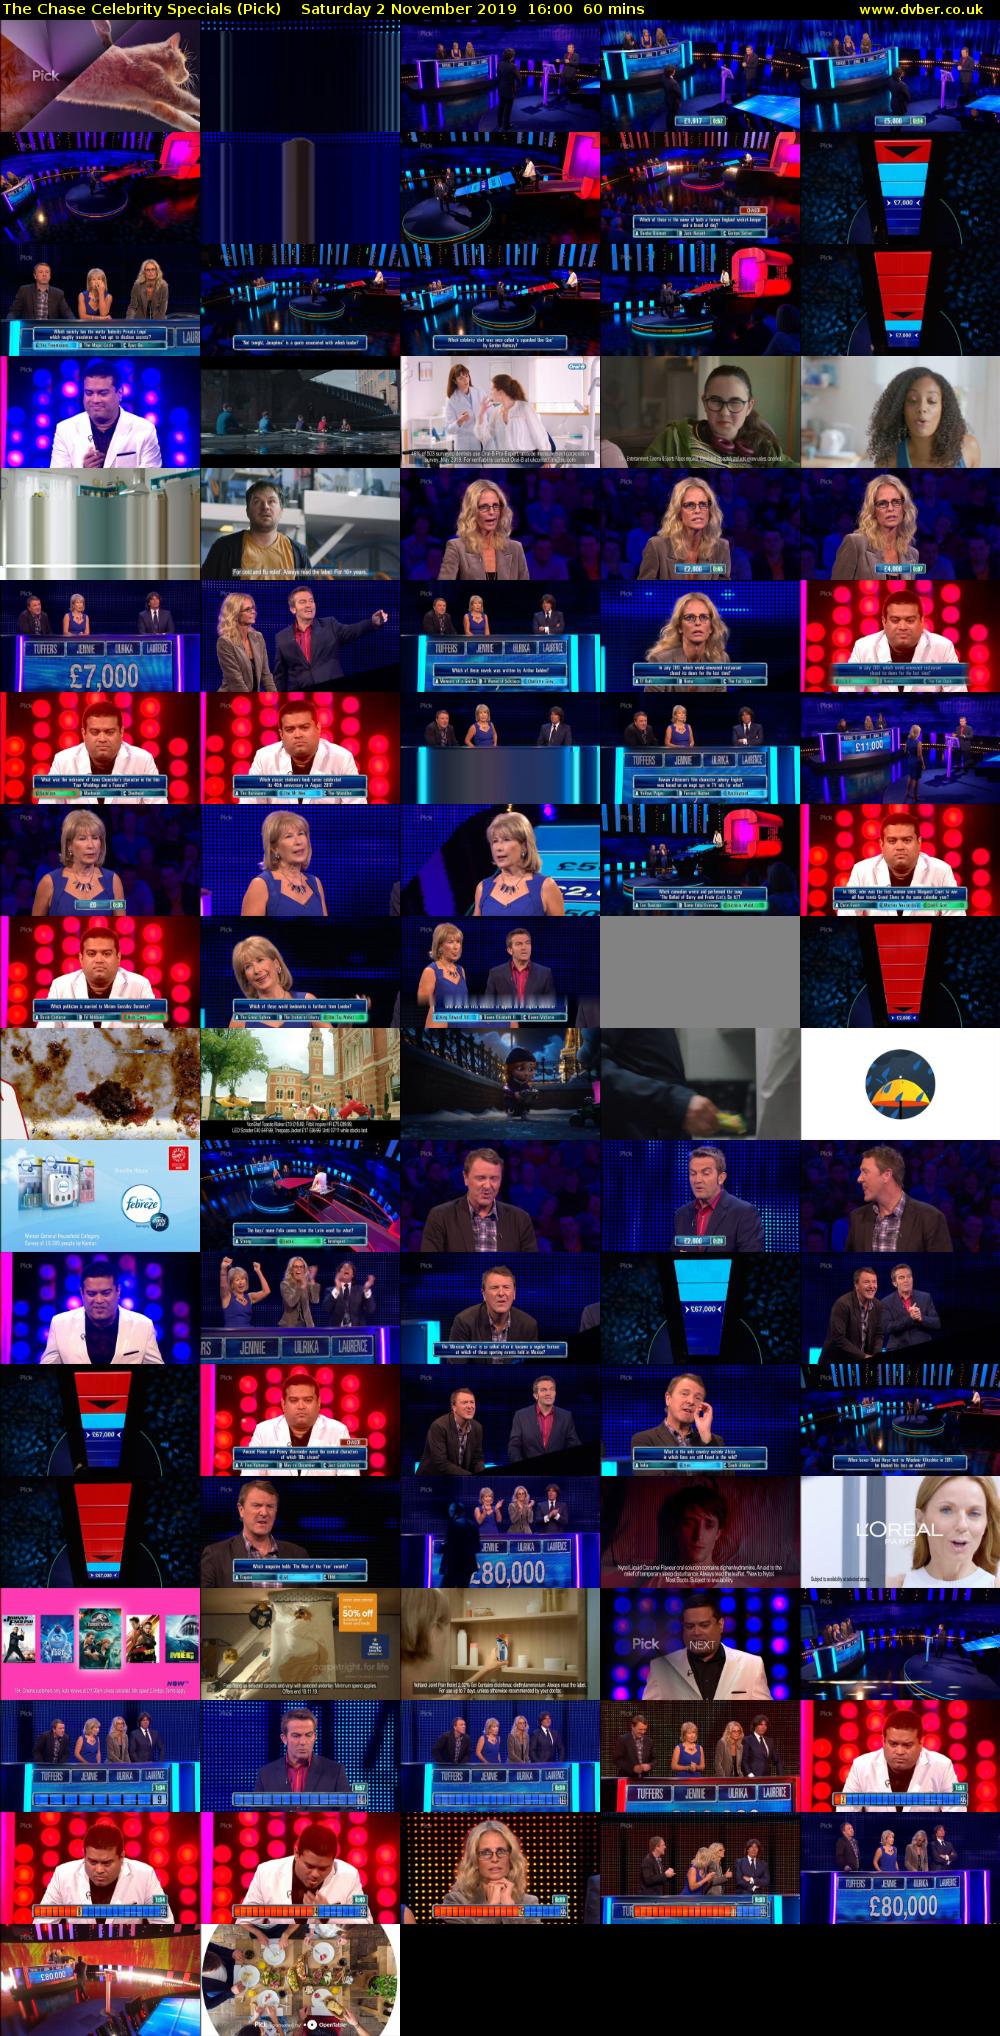 The Chase Celebrity Specials (Pick) Saturday 2 November 2019 16:00 - 17:00